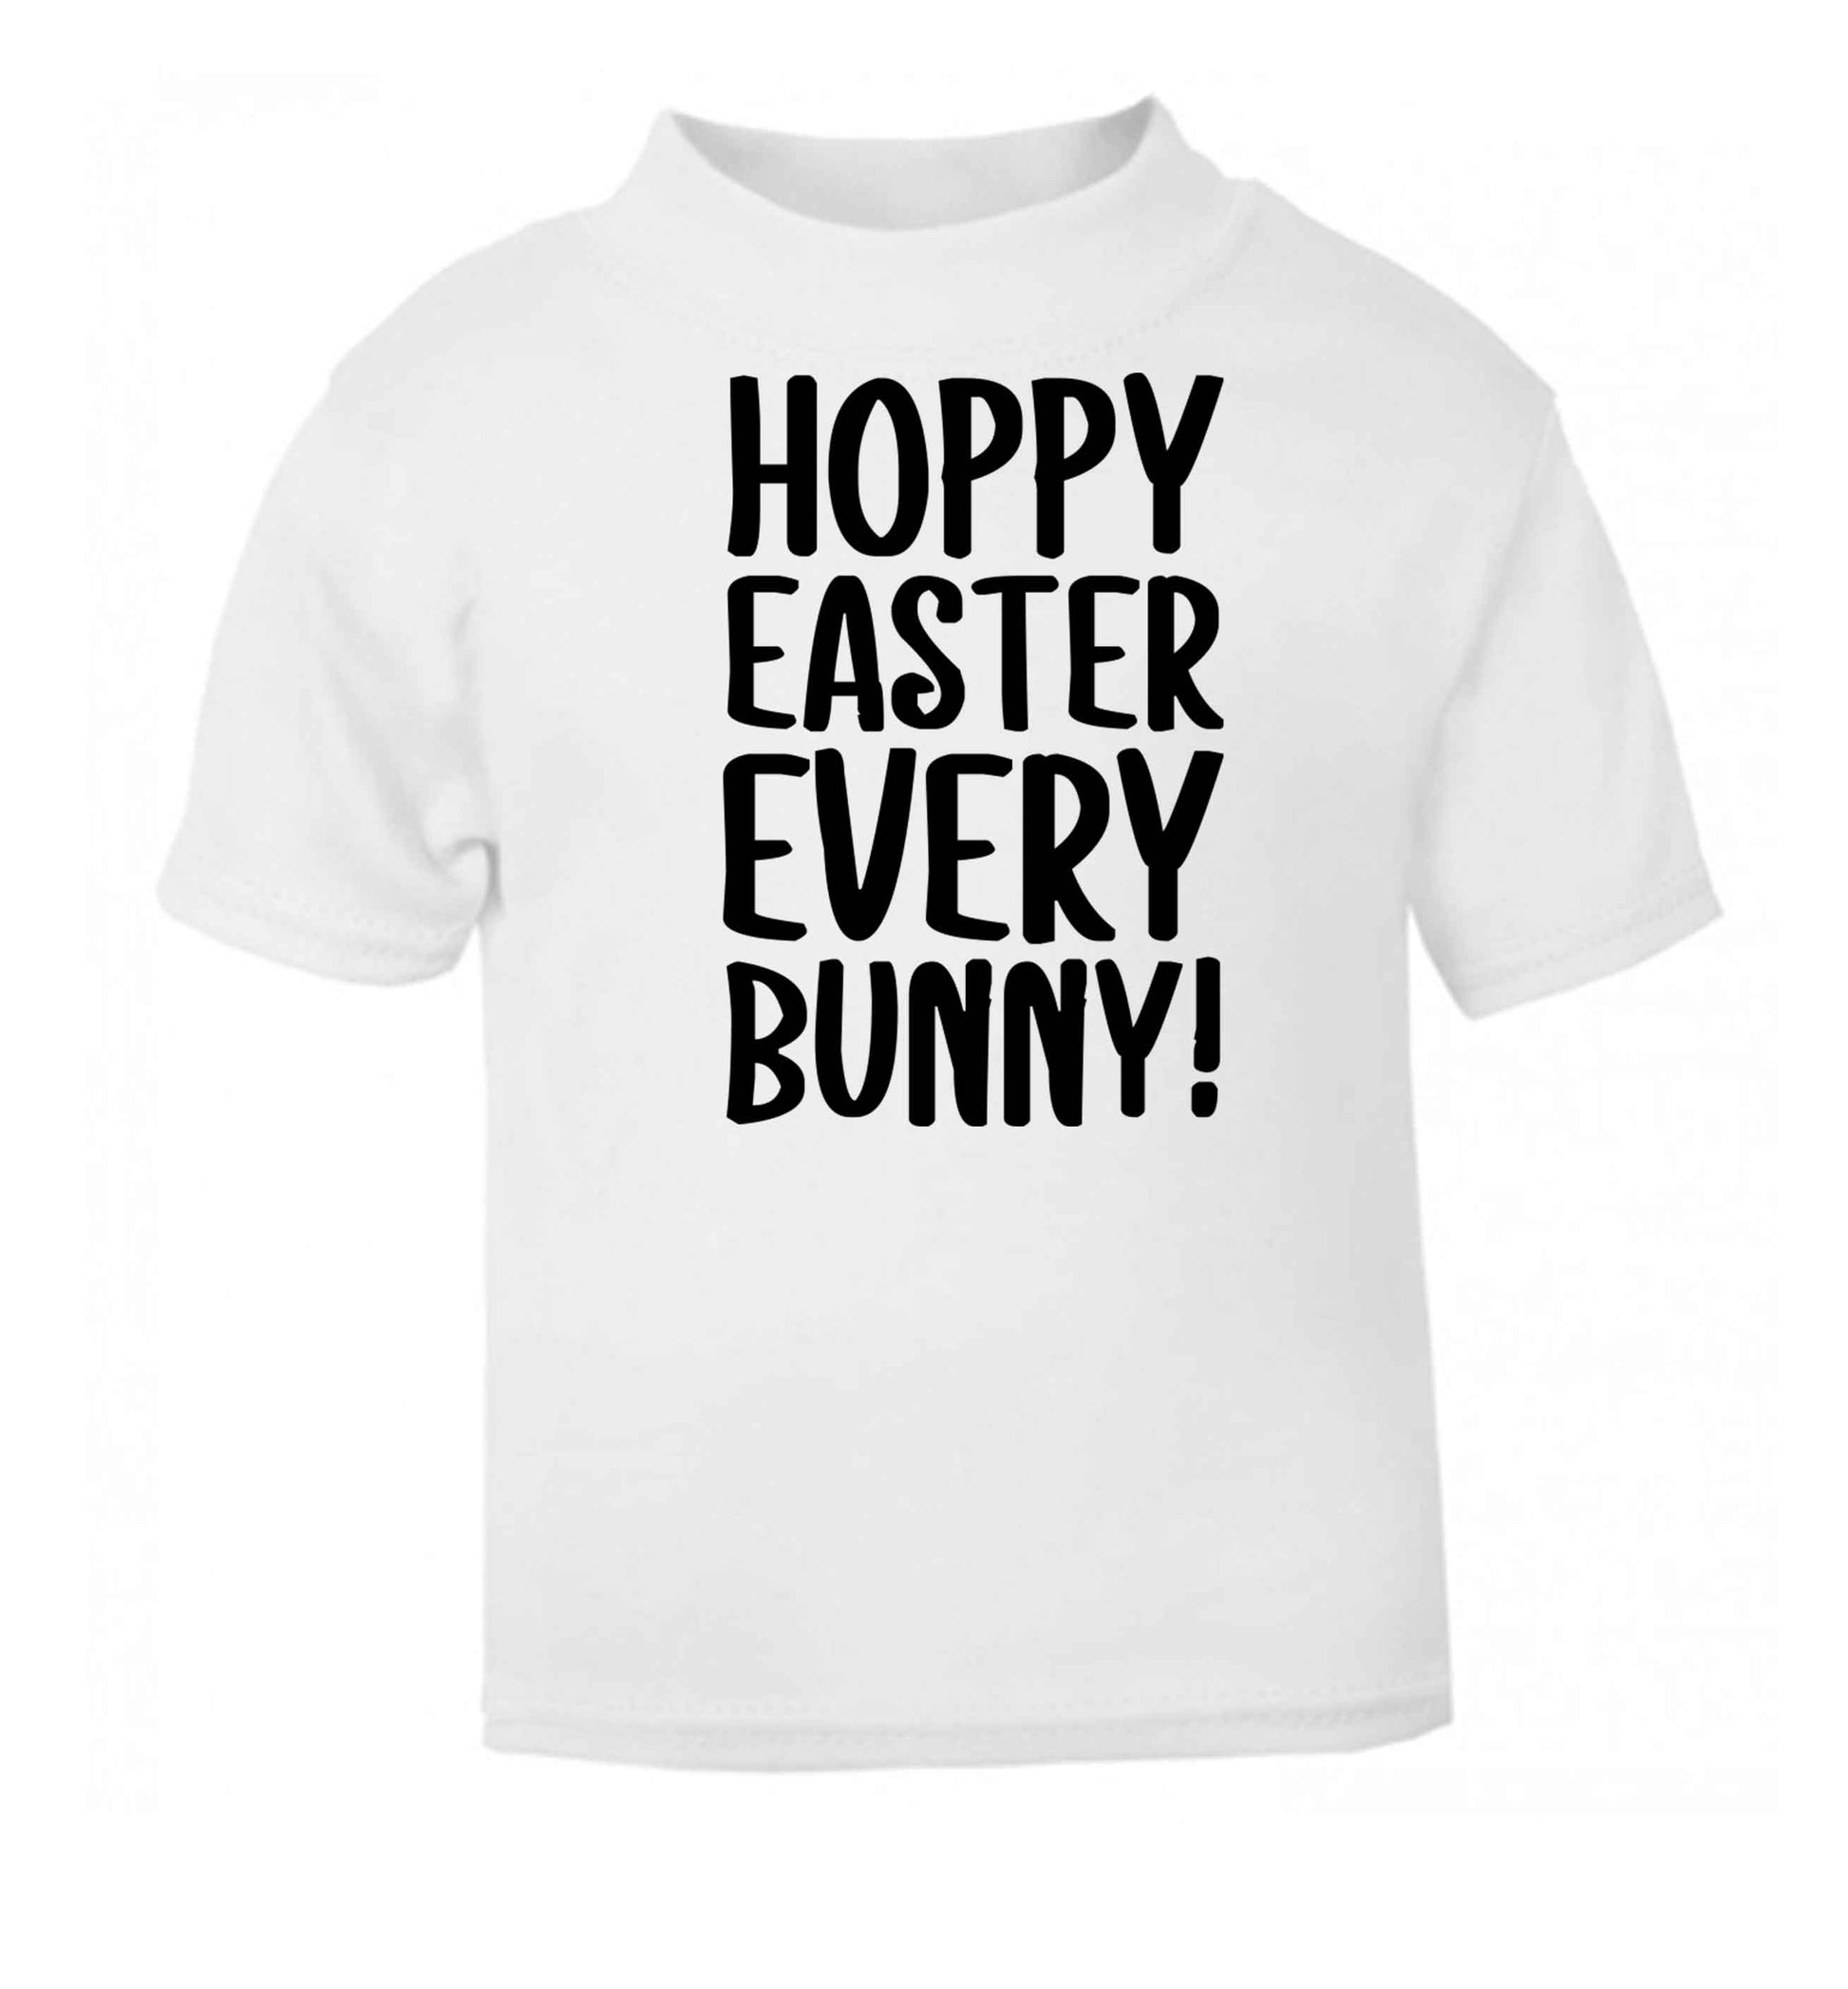 Hoppy Easter every bunny! white baby toddler Tshirt 2 Years